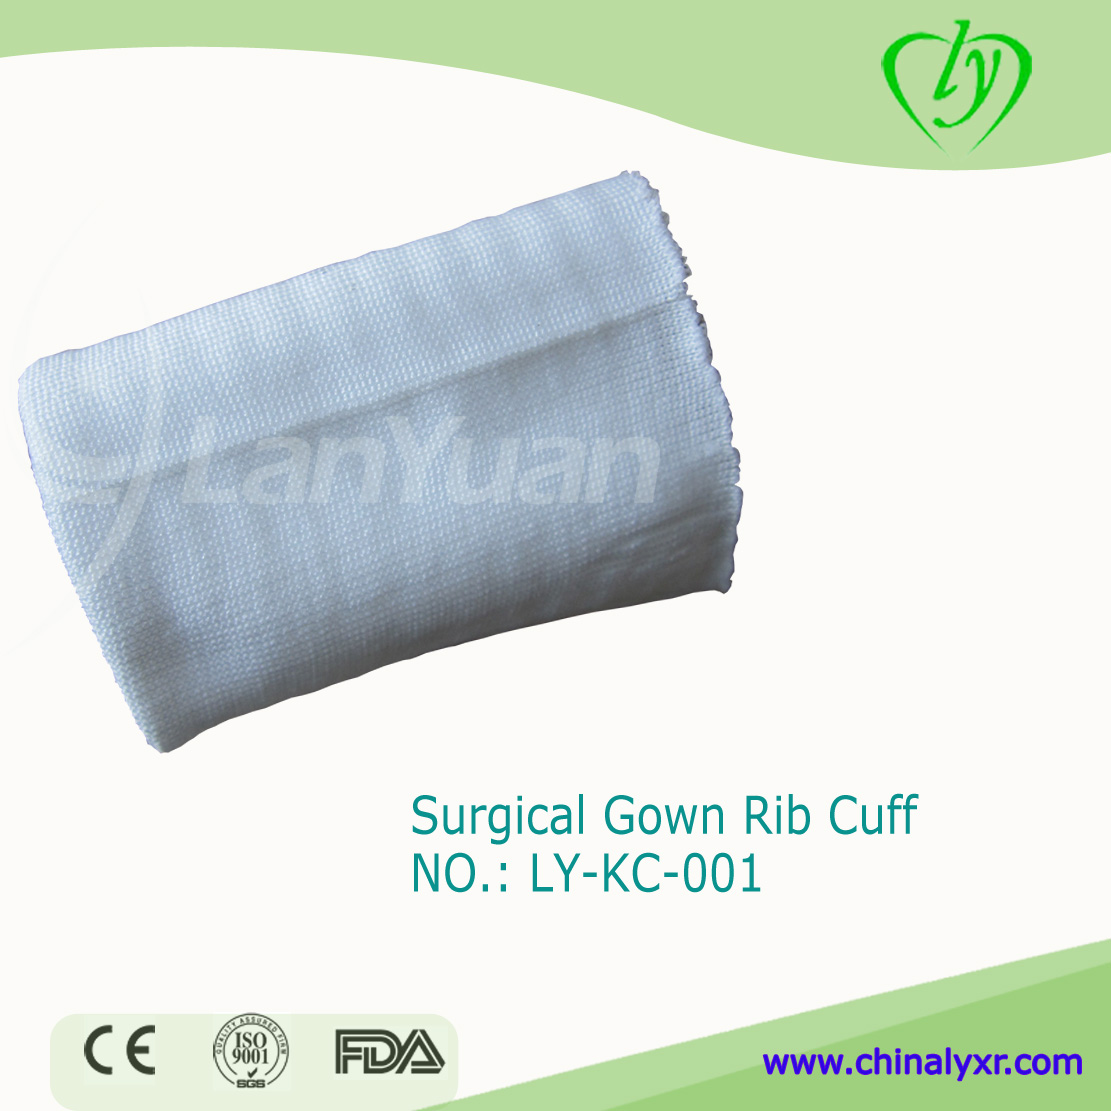 Polyester Knitted Cuff for Surgical Gown